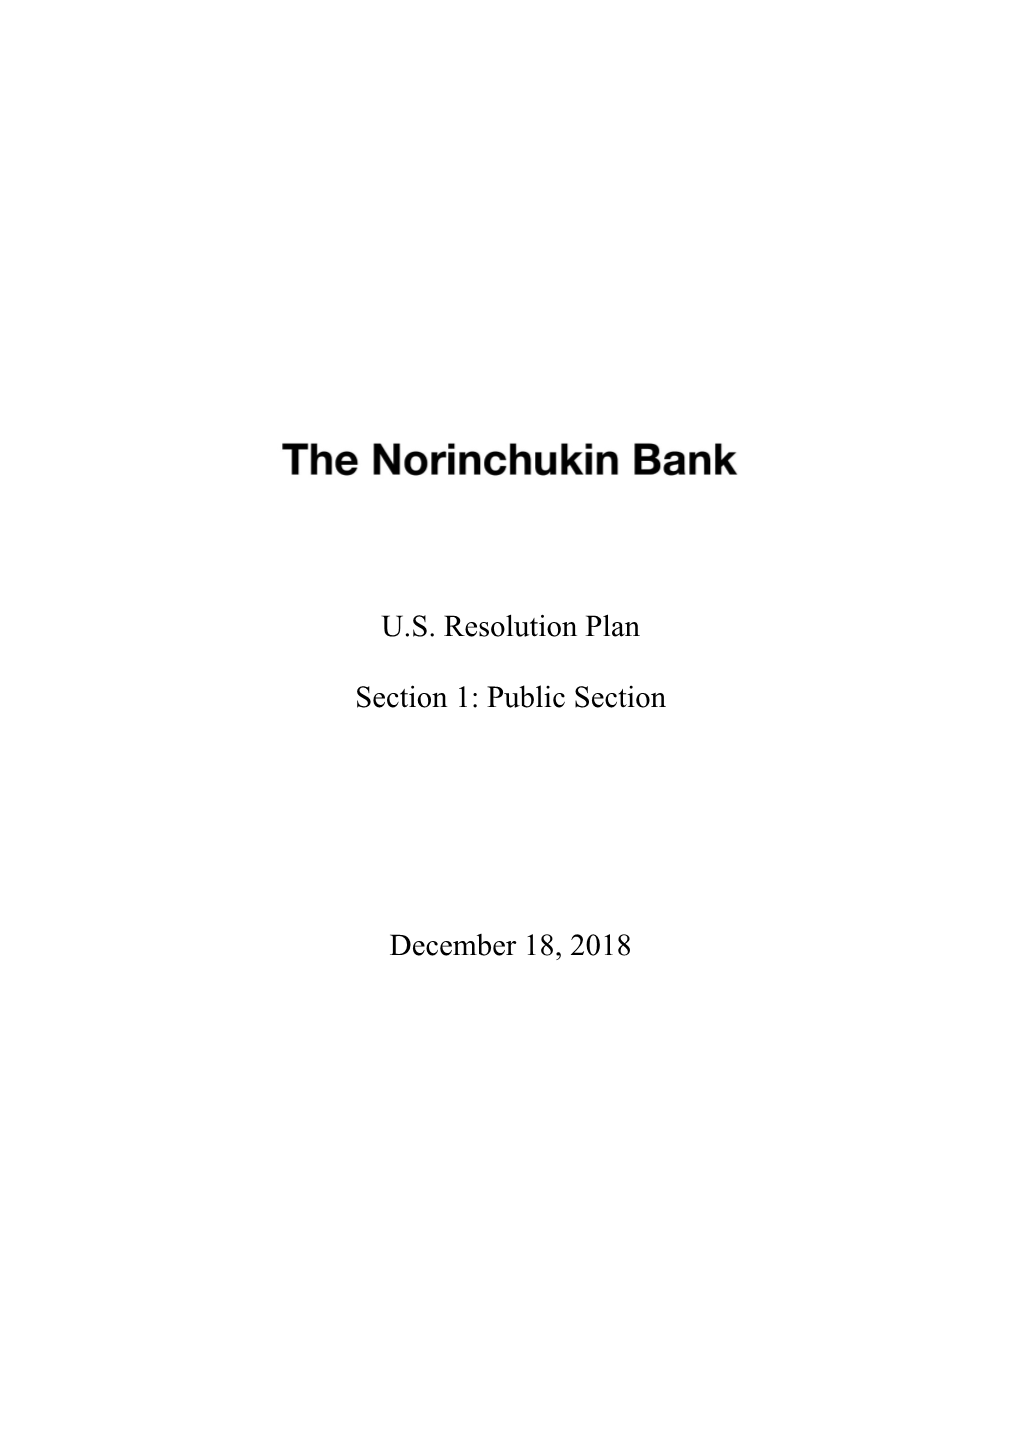 Norinchukin Bank (The “Bank”) Is a Foreign Banking Organization Duly Organized and Existing Under the Laws of Japan